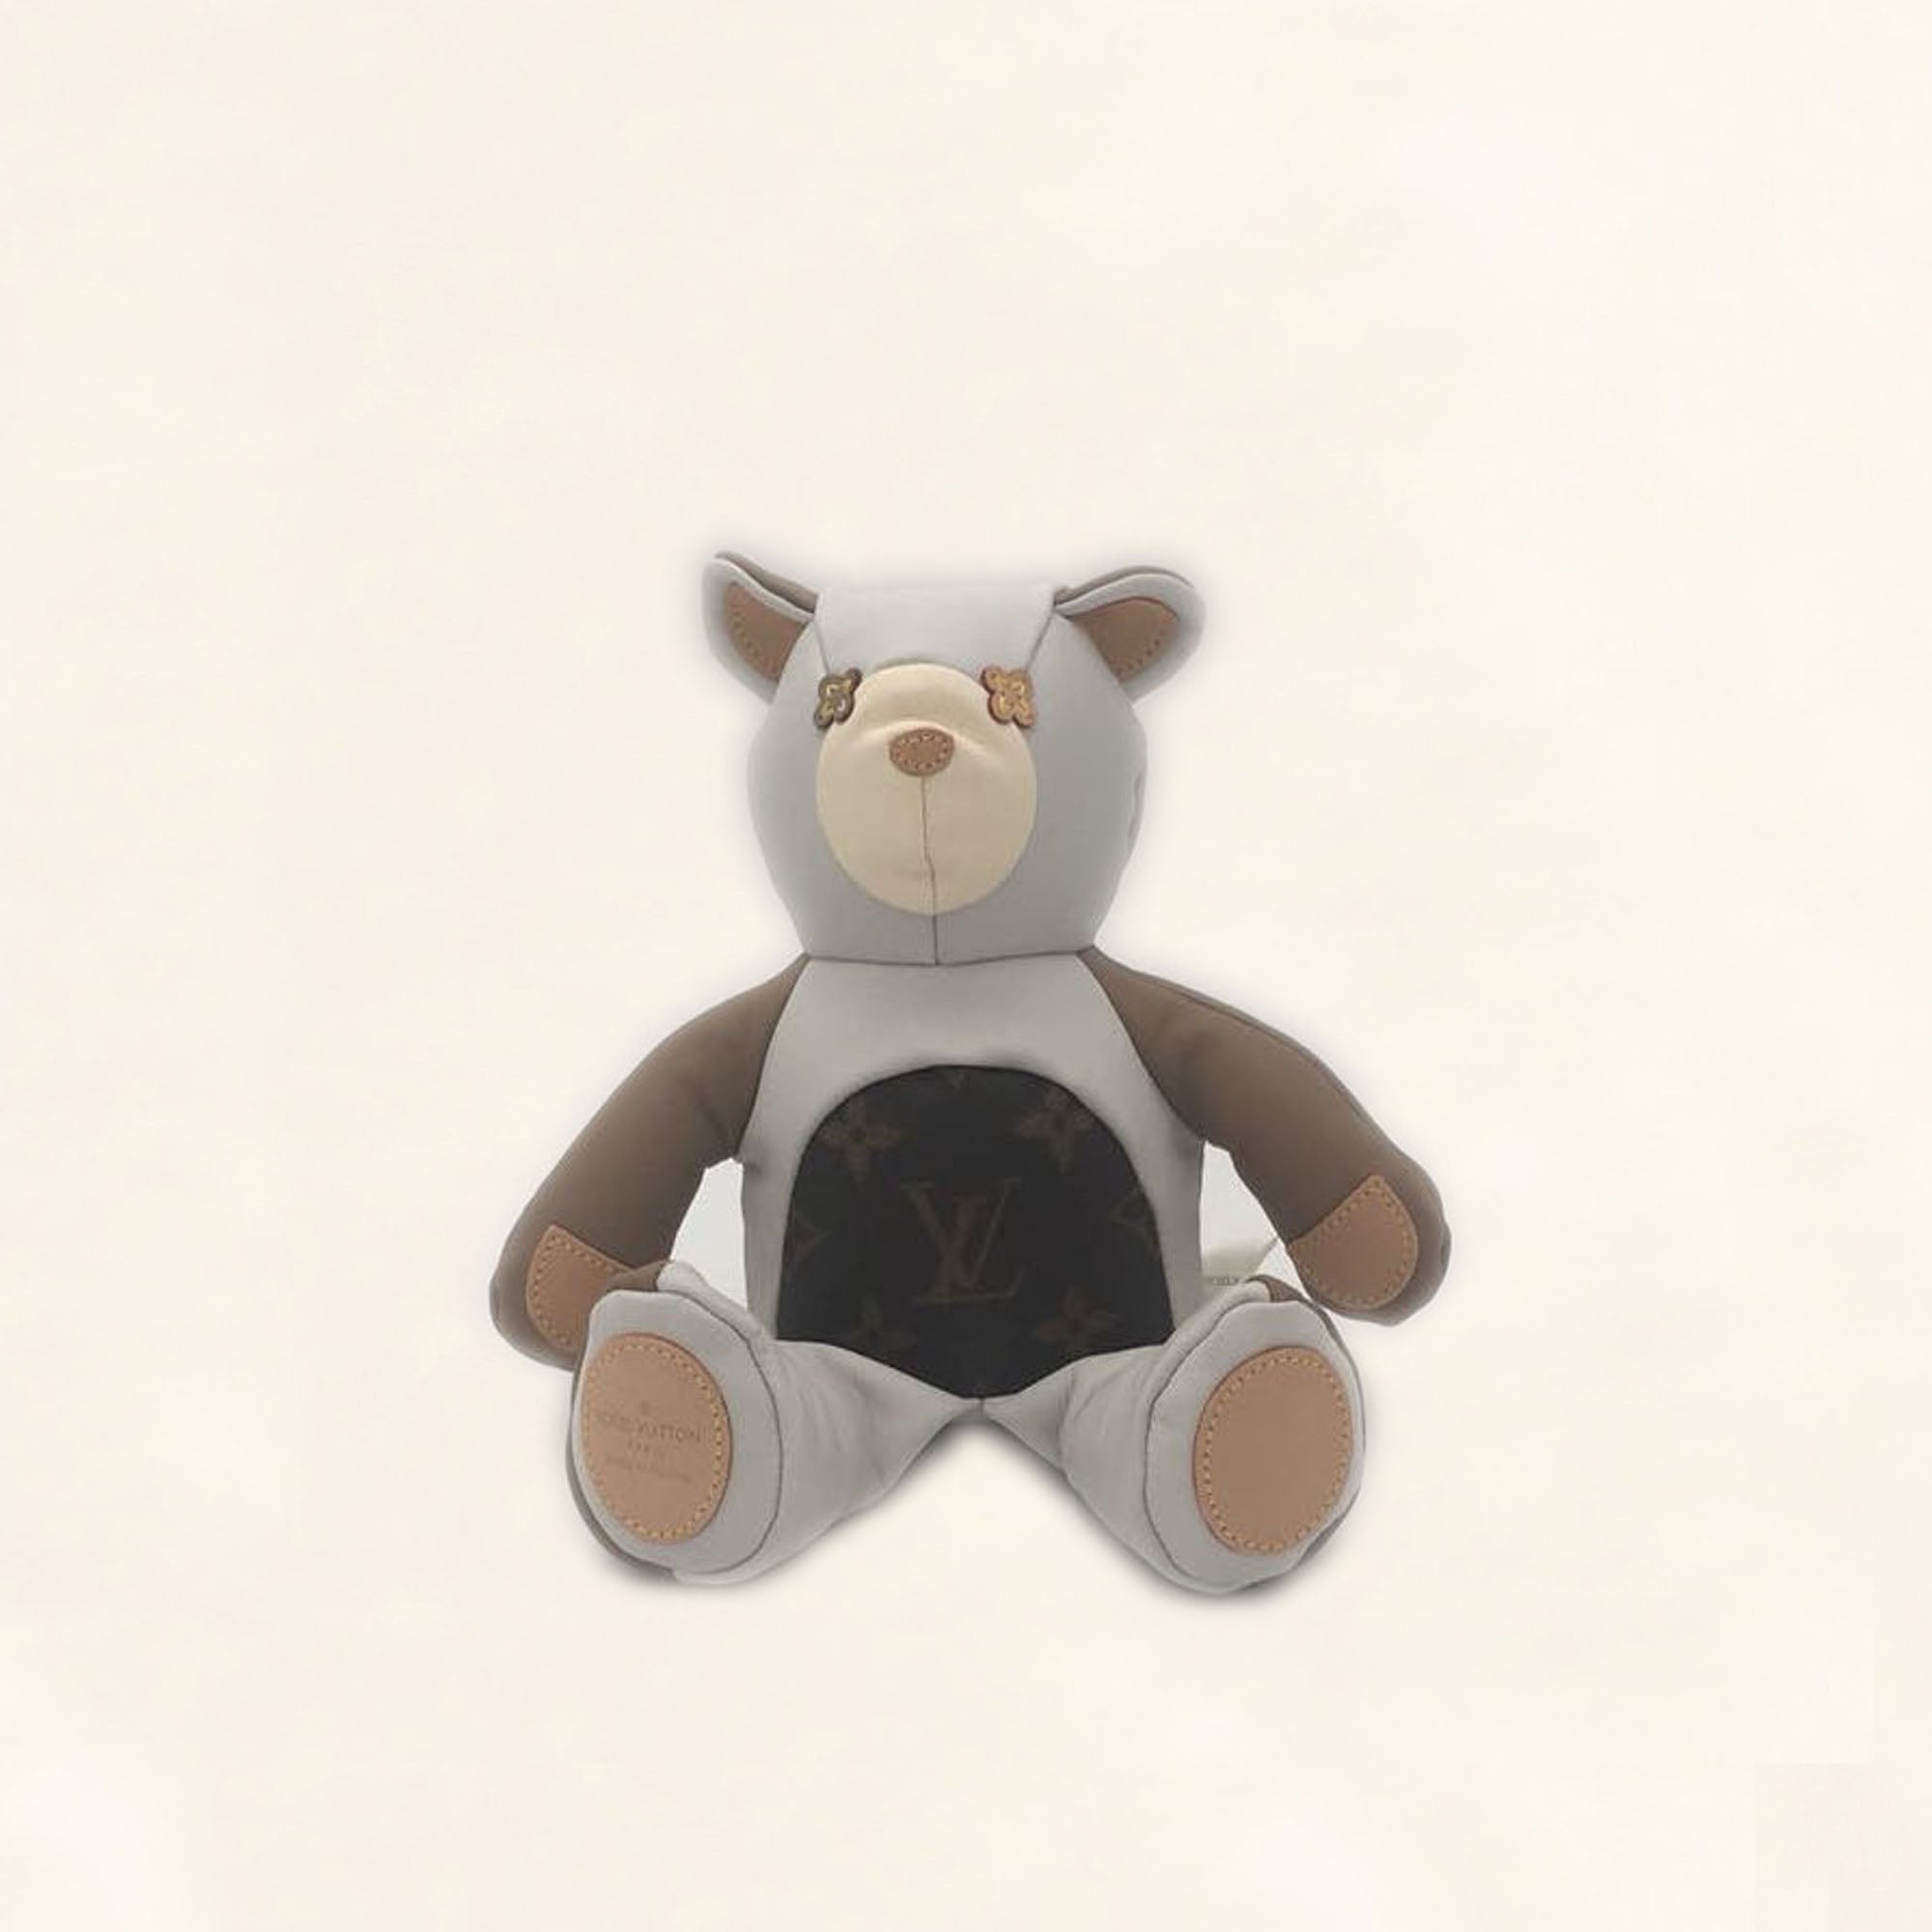 Louis Teddy Bear - Luxury Baby Collection - For Baby, New GI0869